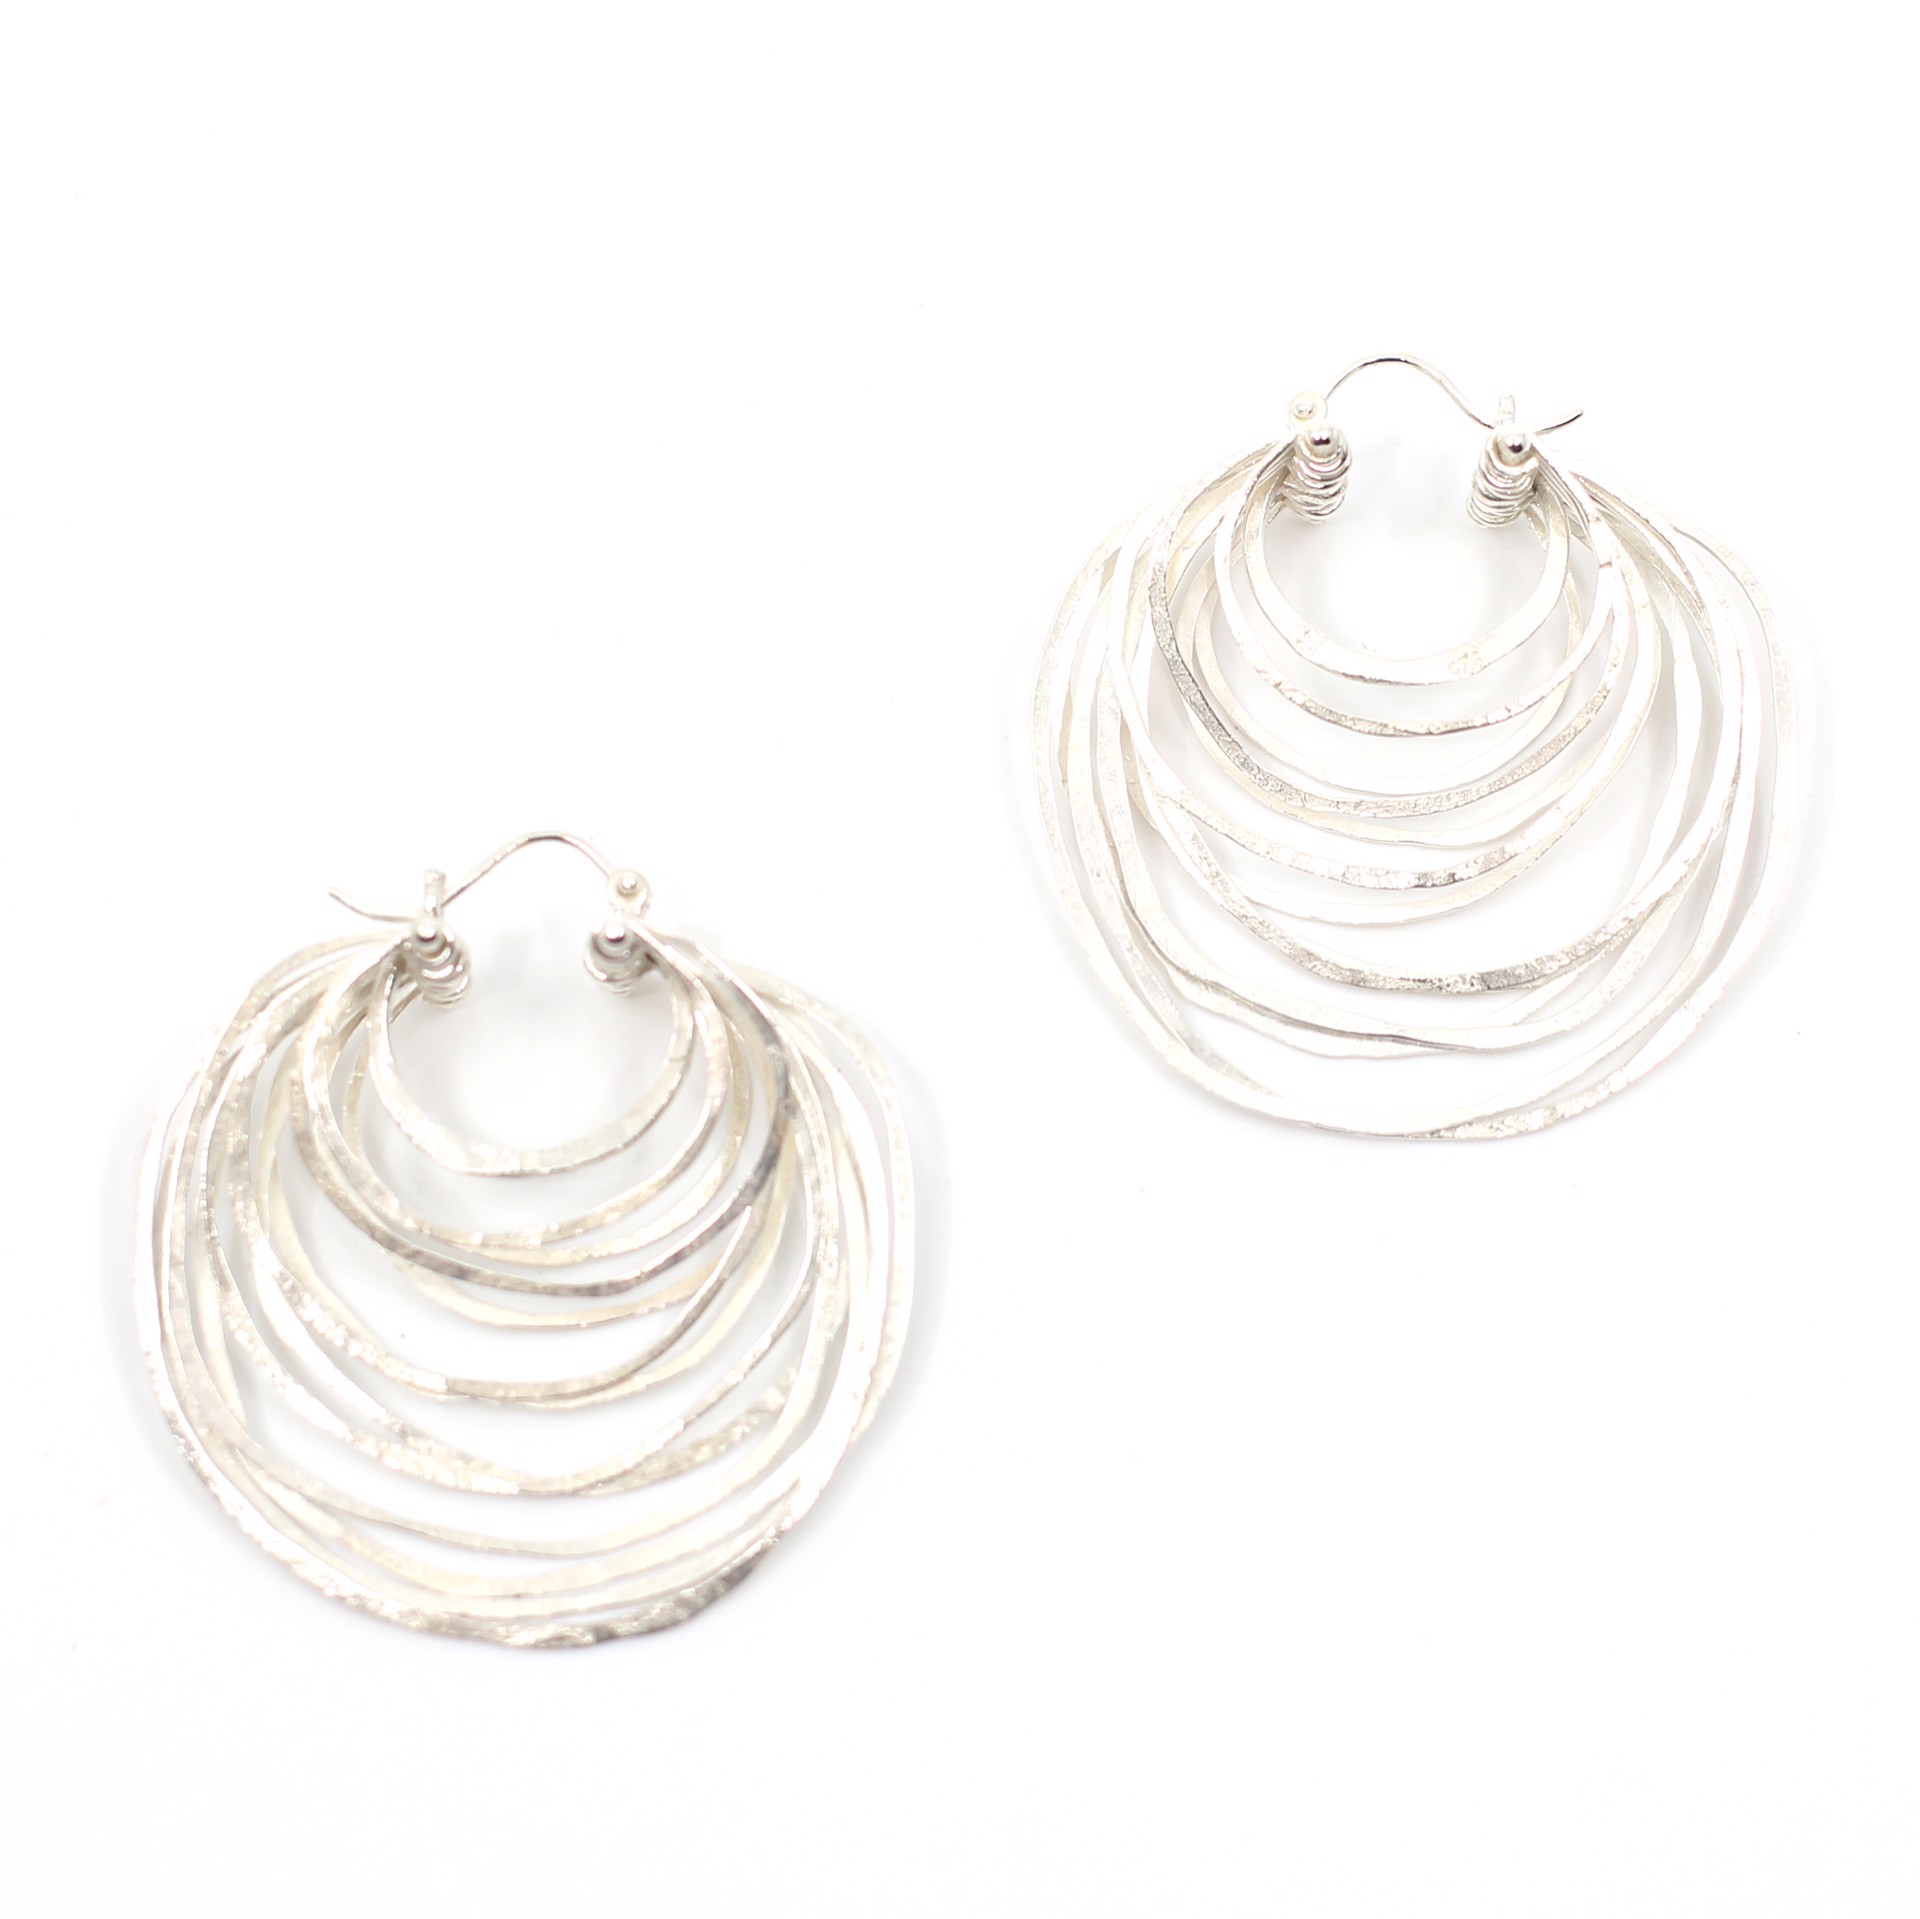 Large Crescent Hoops by Leia Zumbro